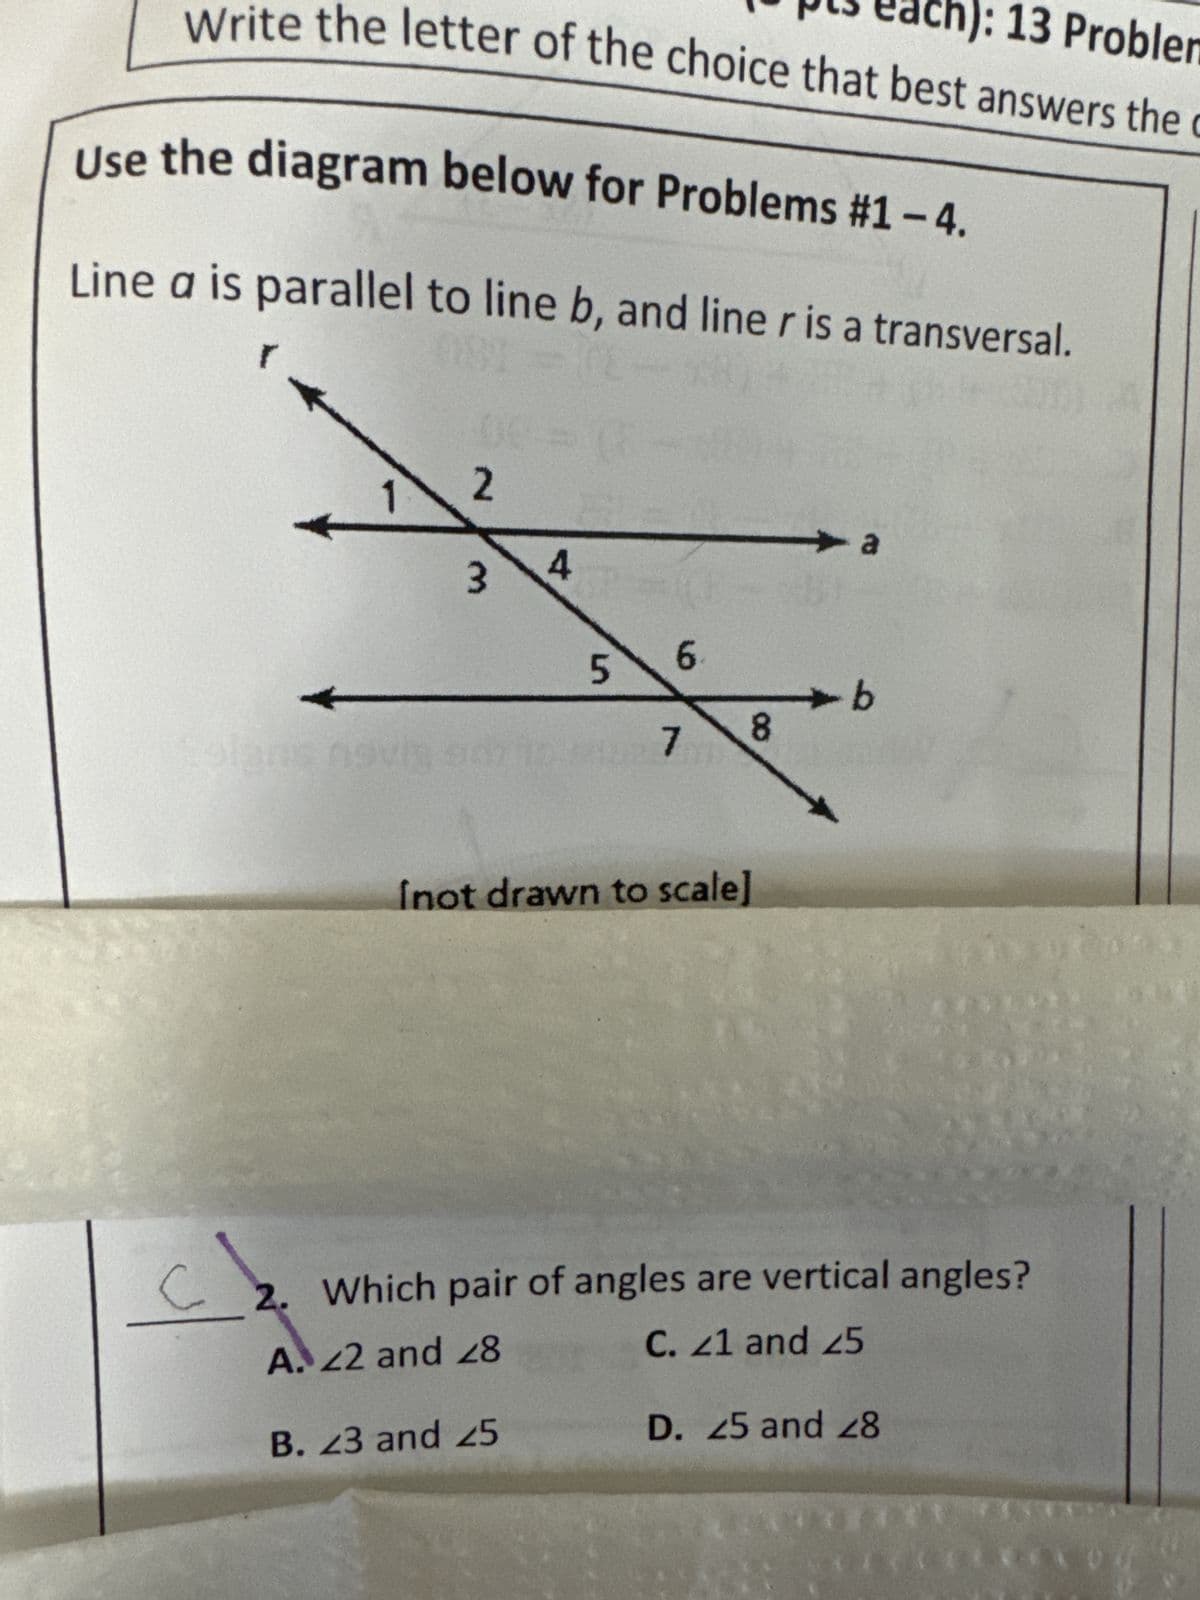 ): 13 Problem
Write the letter of the choice that best answers the C
Use the diagram below for Problems #1 - 4.
Line a is parallel to line b, and line r is a transversal.
C
2
3
4
5
B. 23 and 25
6
7
8
Inot drawn to scale]
a
-b
2. Which pair of angles are vertical angles?
A. 22 and 28
C. 21 and 25
***
D. 25 and 28
EXCELTXO